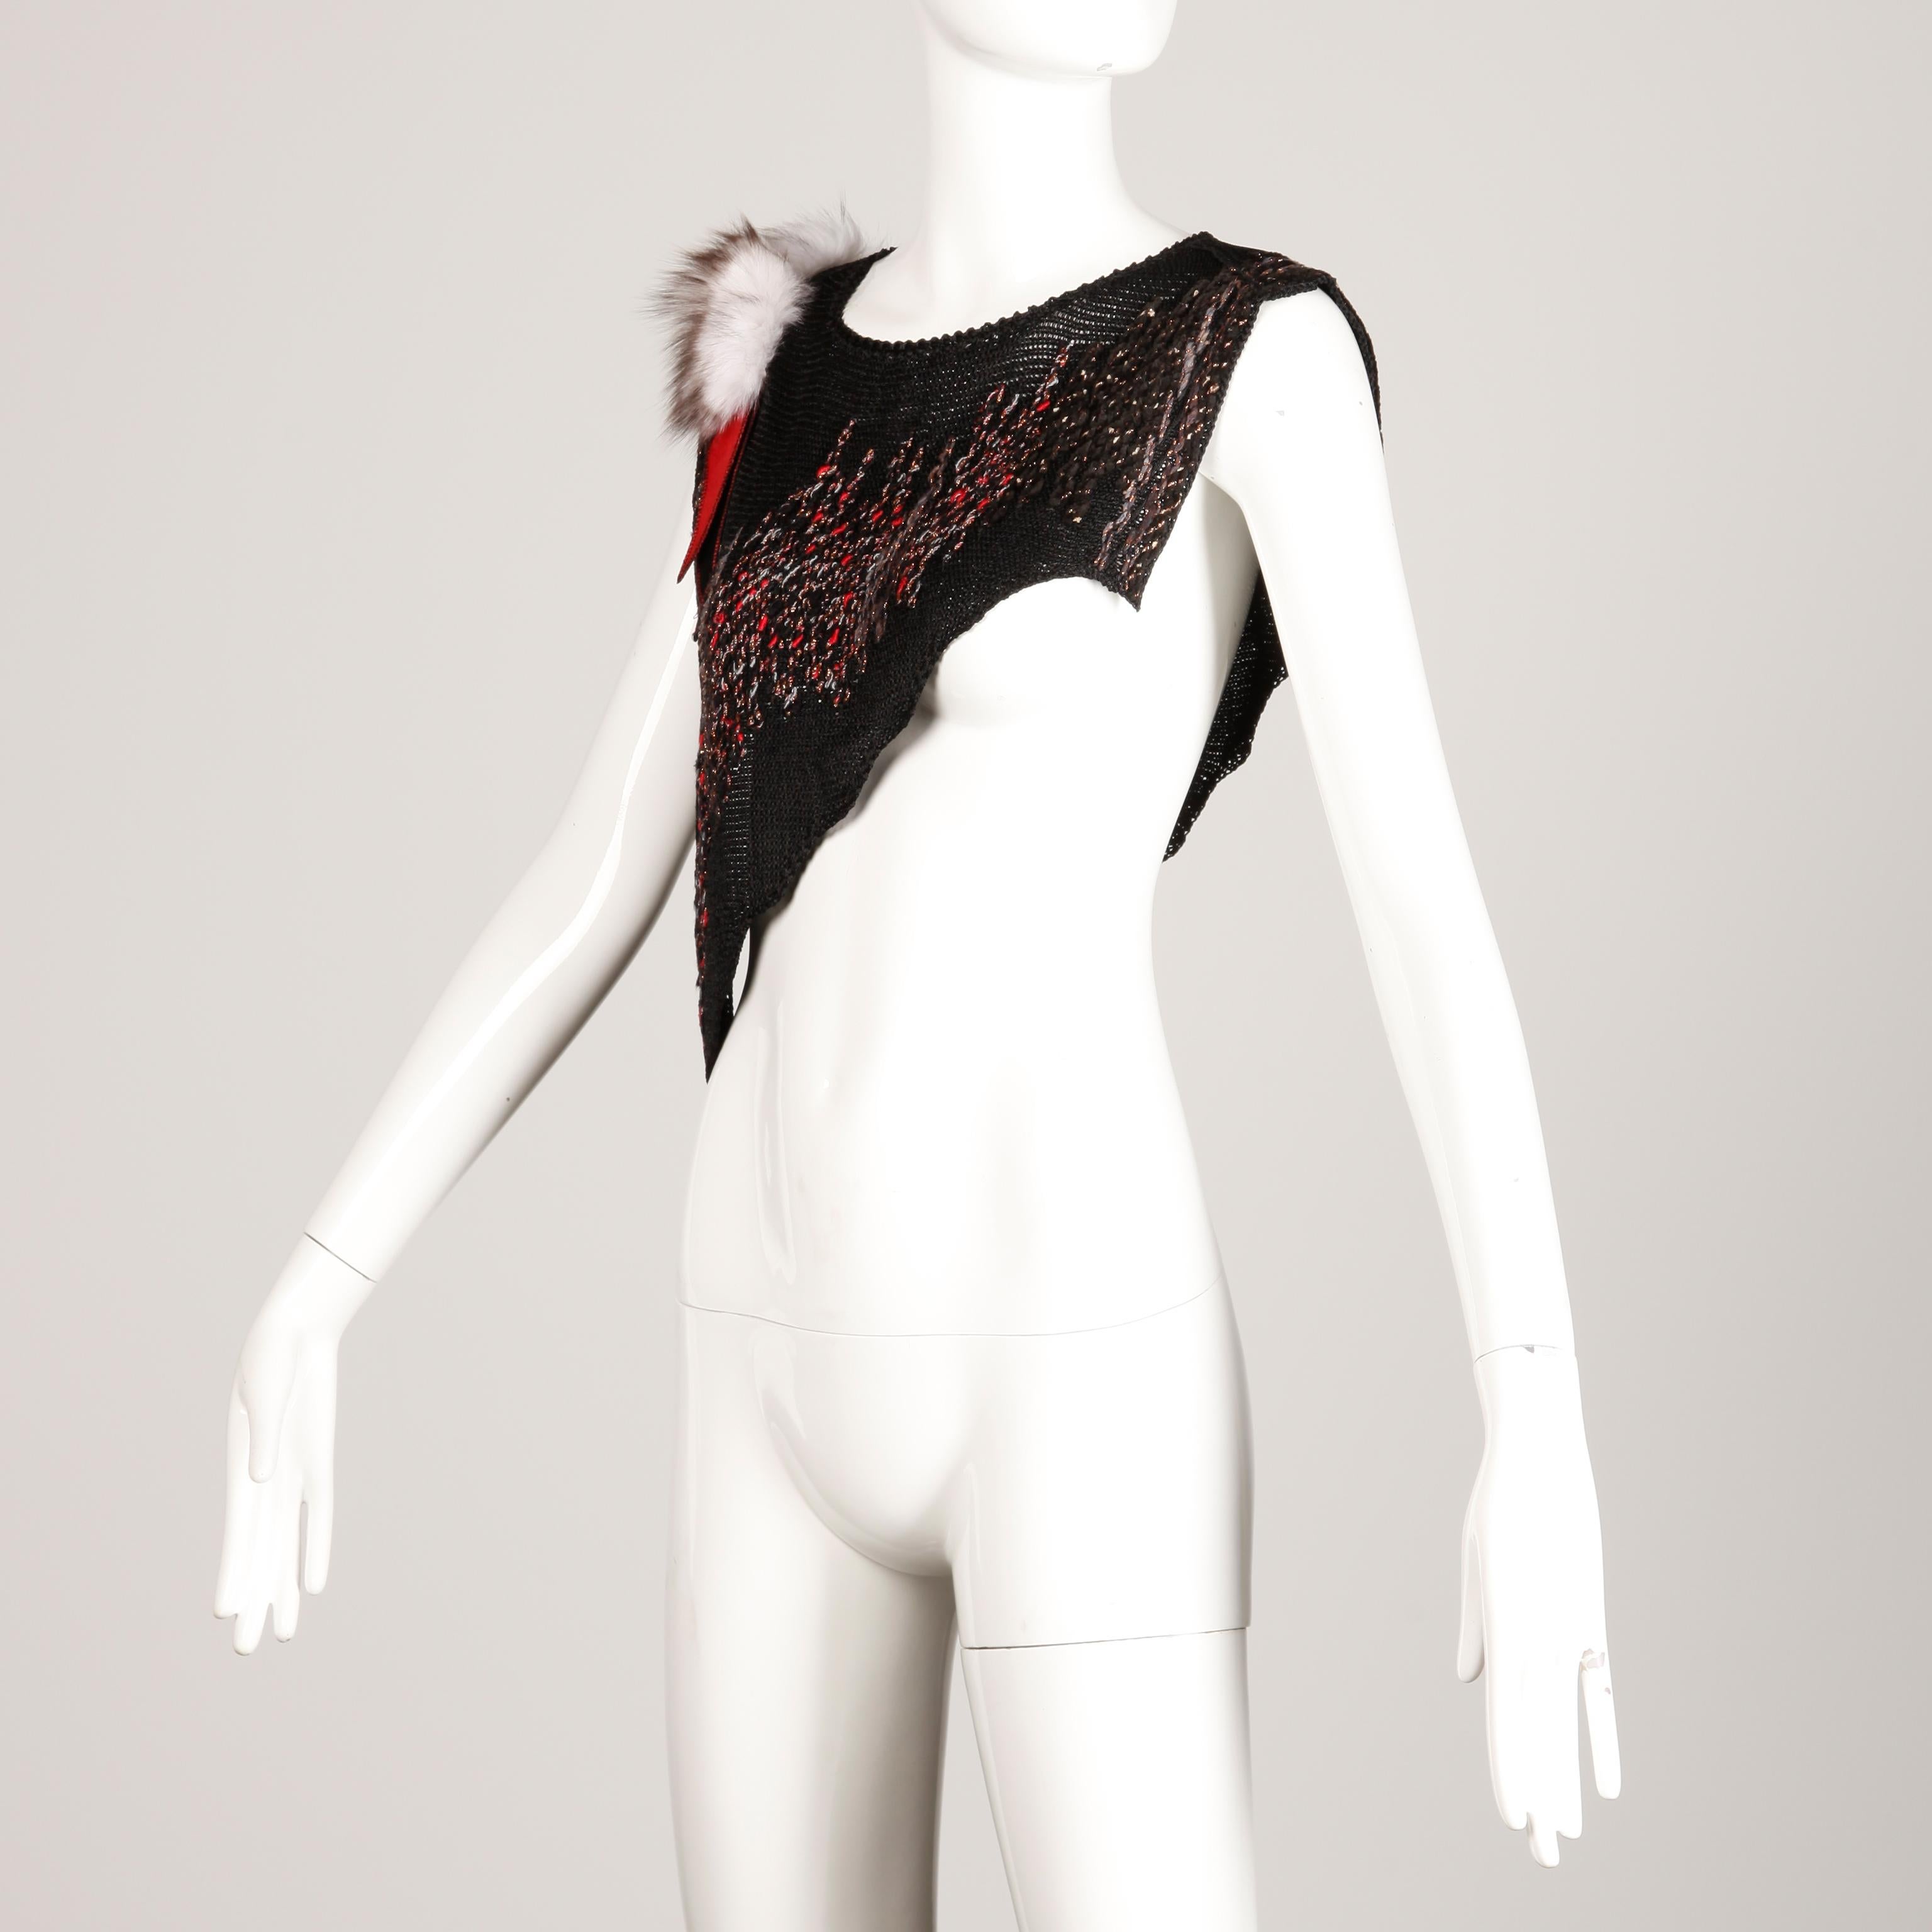 Unique 1980s vintage red and black knit shimmery metallic top, collar or layering piece with a fox fur detail on one shoulder. Asymmetric cut and open sides. The marked size is medium but this will fit most sizes small-large on account of it's free